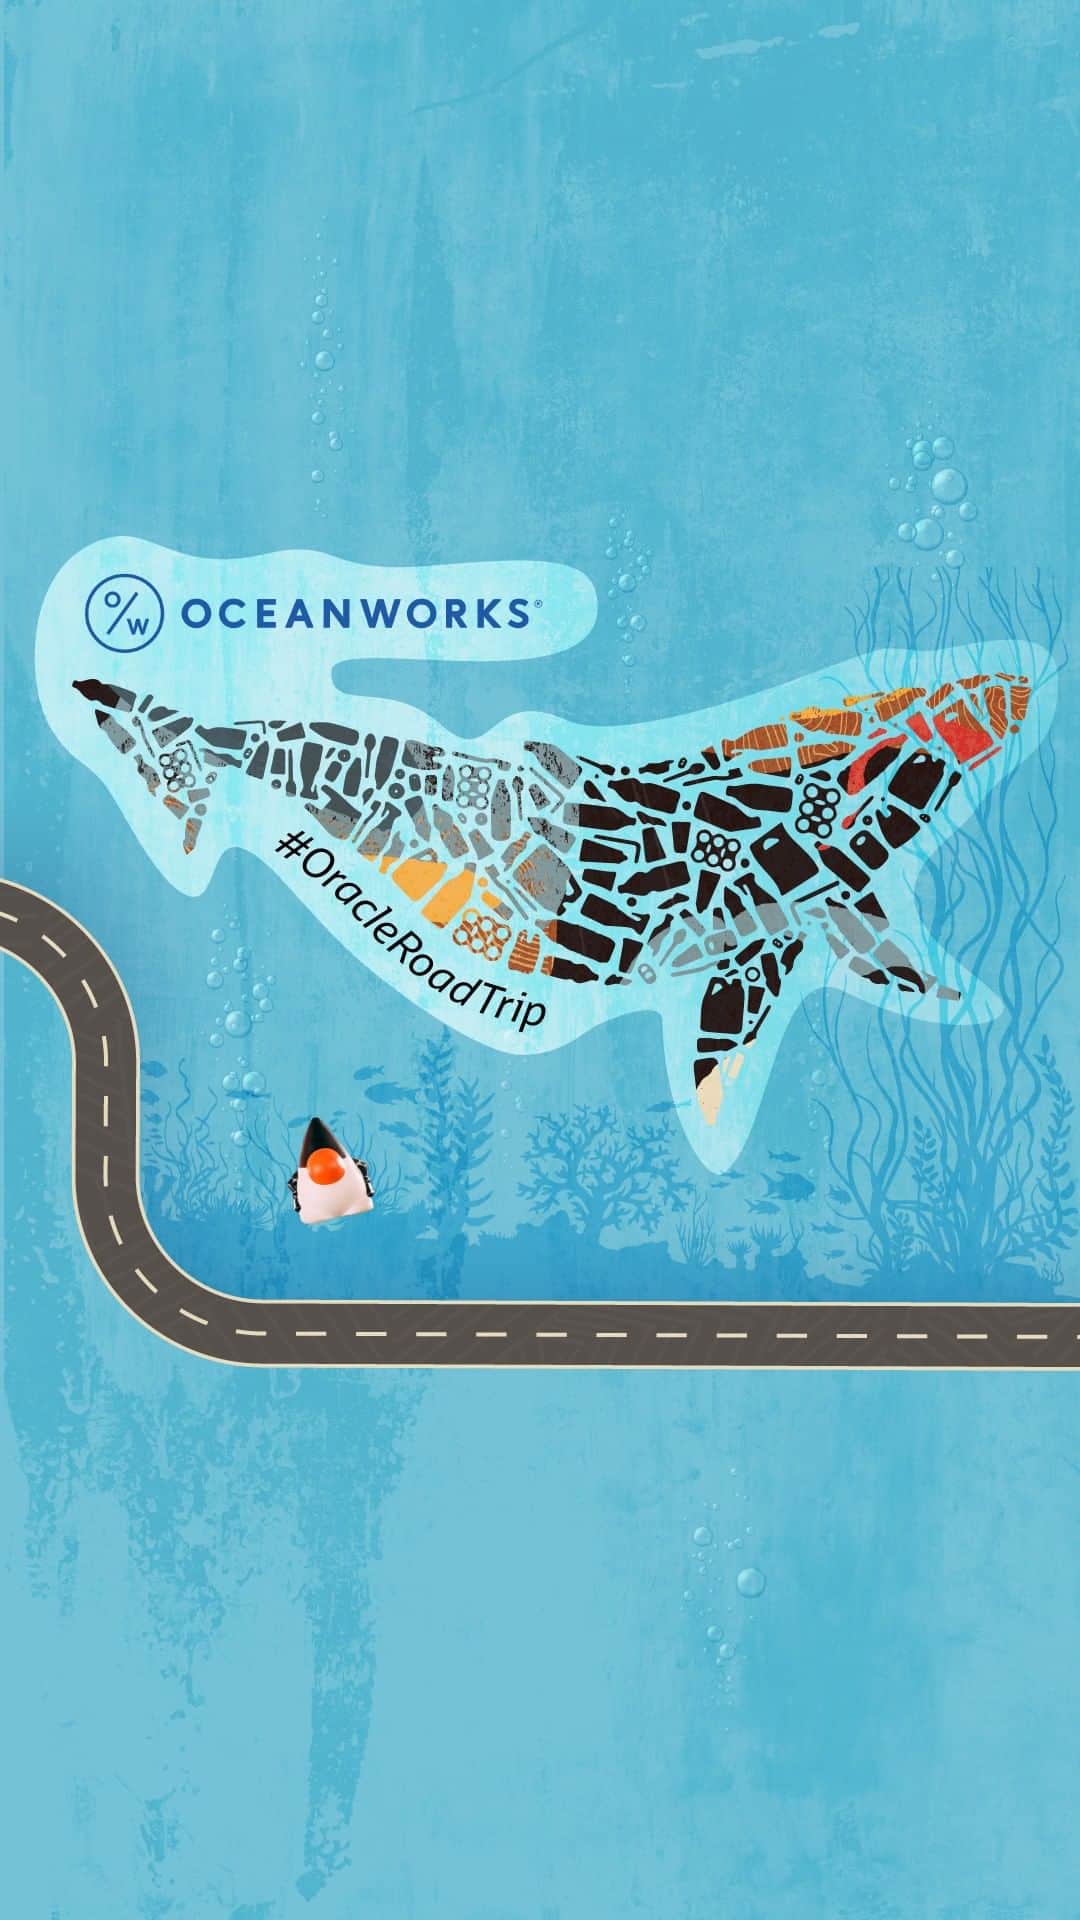 Oracle Corp. （オラクル）のインスタグラム：「Imagine a world without plastic waste! @Oceanworks is helping us get there, by inventing a marketplace for #recycled ocean plastic. Let’s head to #LosAngeles to learn more.」